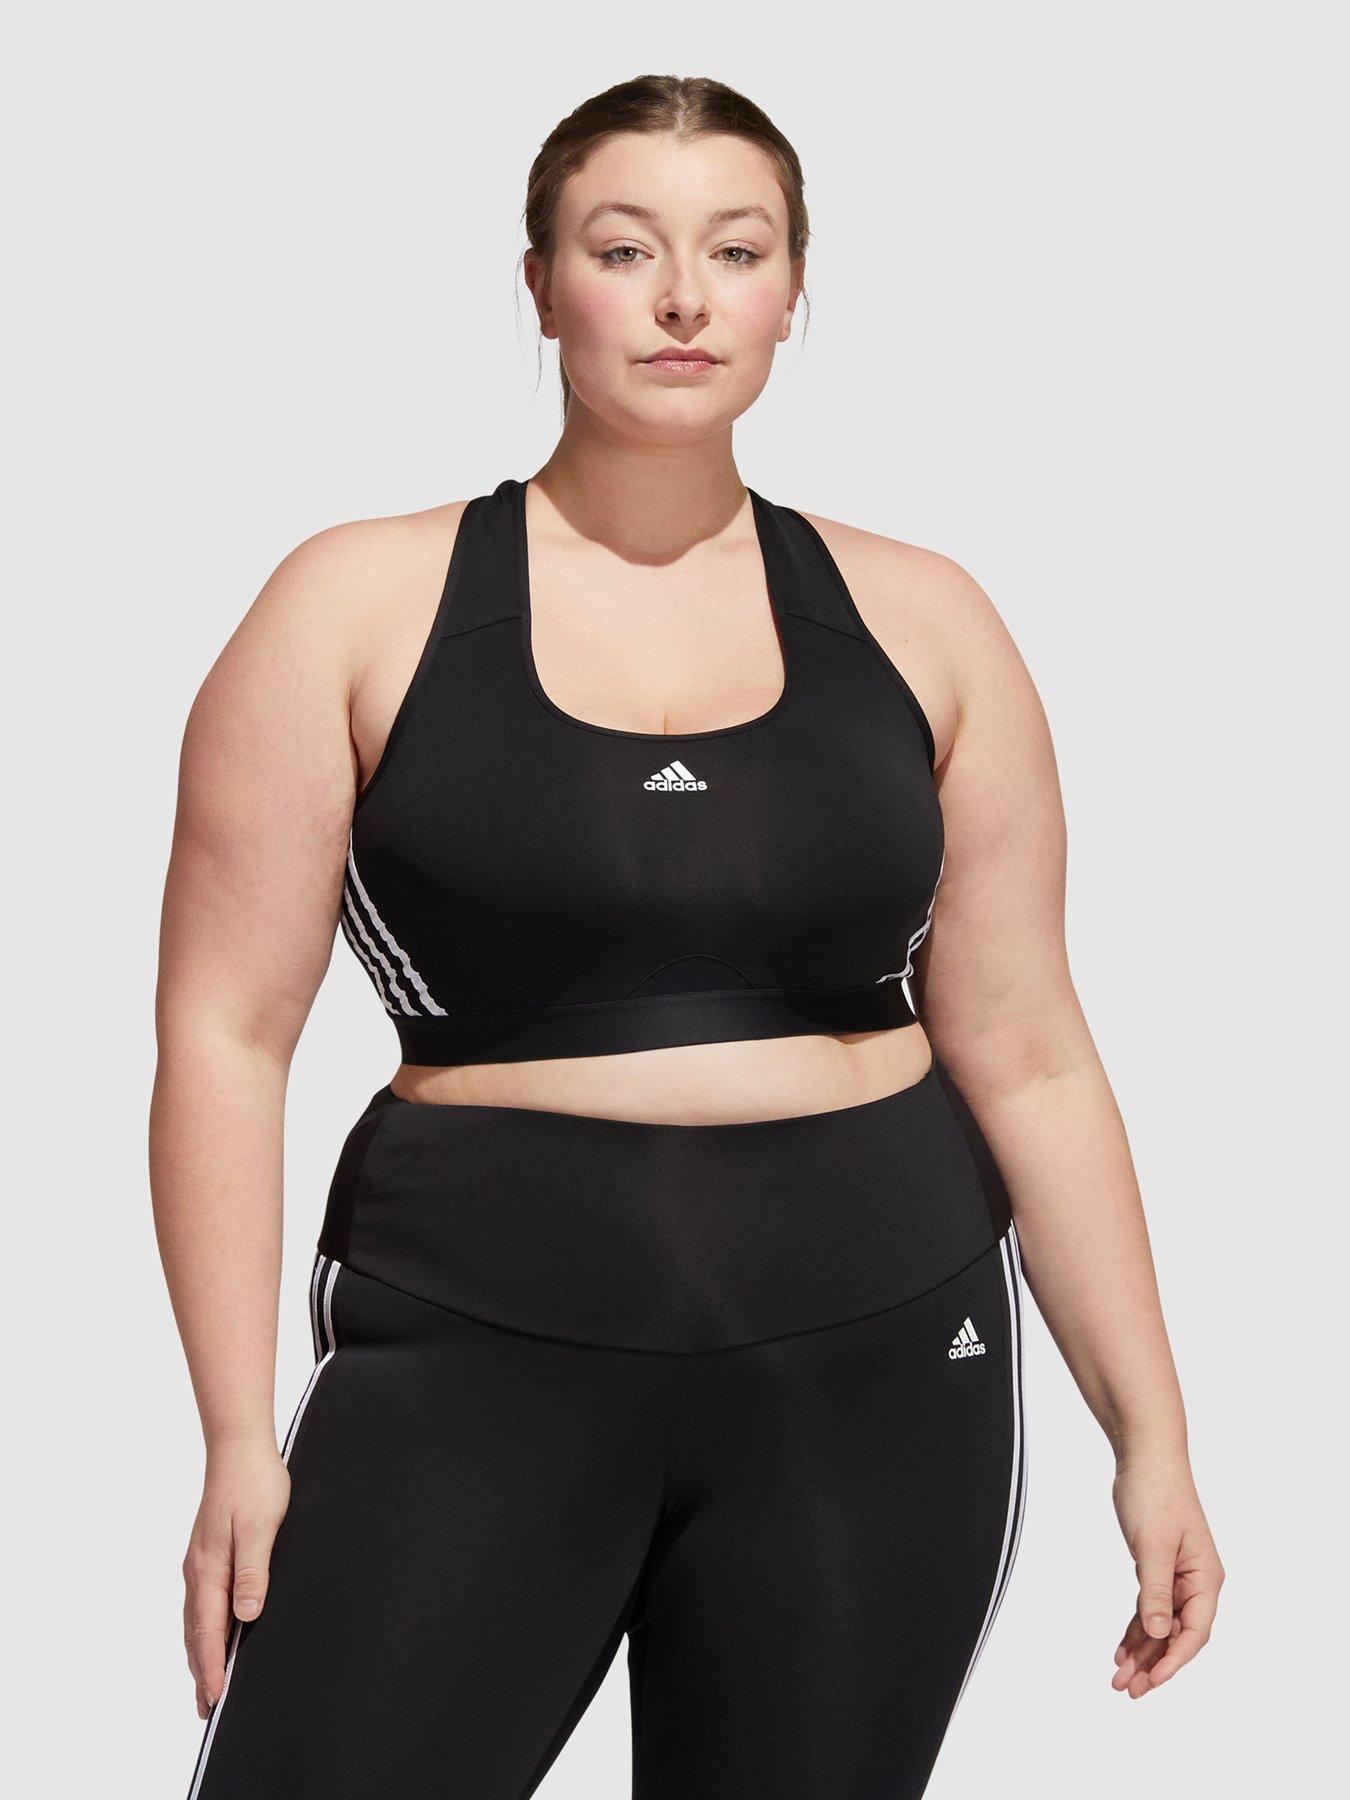 All Black Friday Deals, All Offers, Black, Plus Size